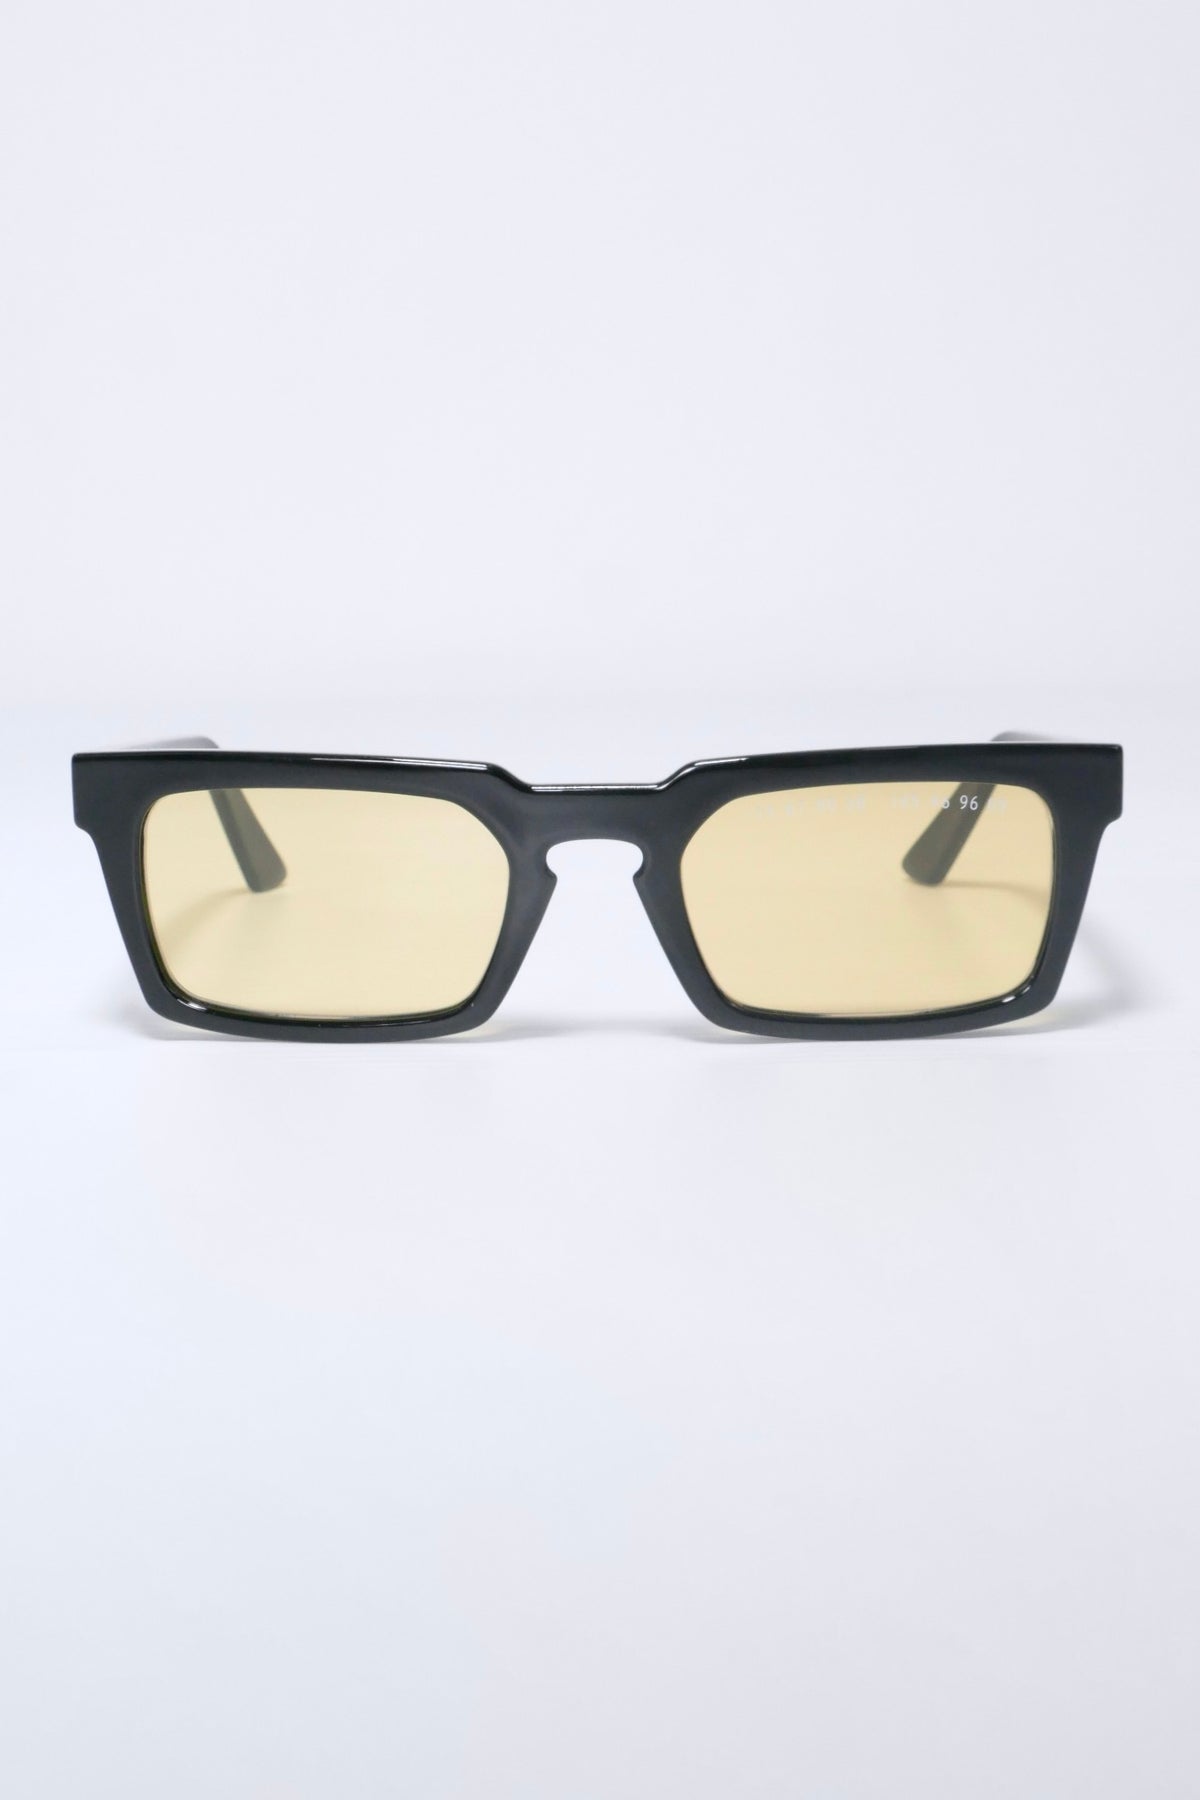 Clean Waves Type 02 Low Sunglasses - Black/Yellow